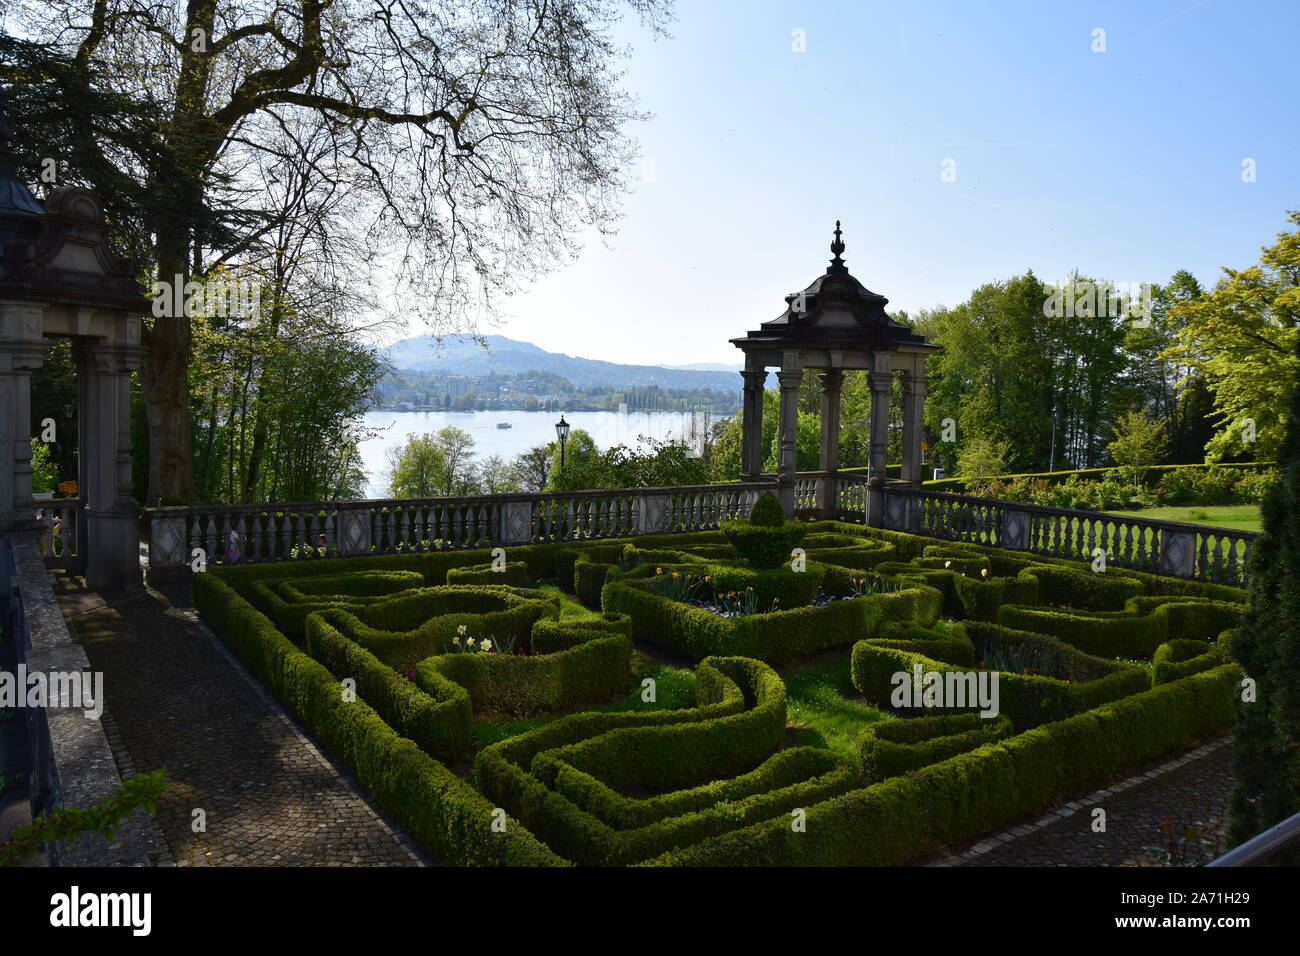 Garden Labyrinth High Resolution Stock Photography and Images - Alamy